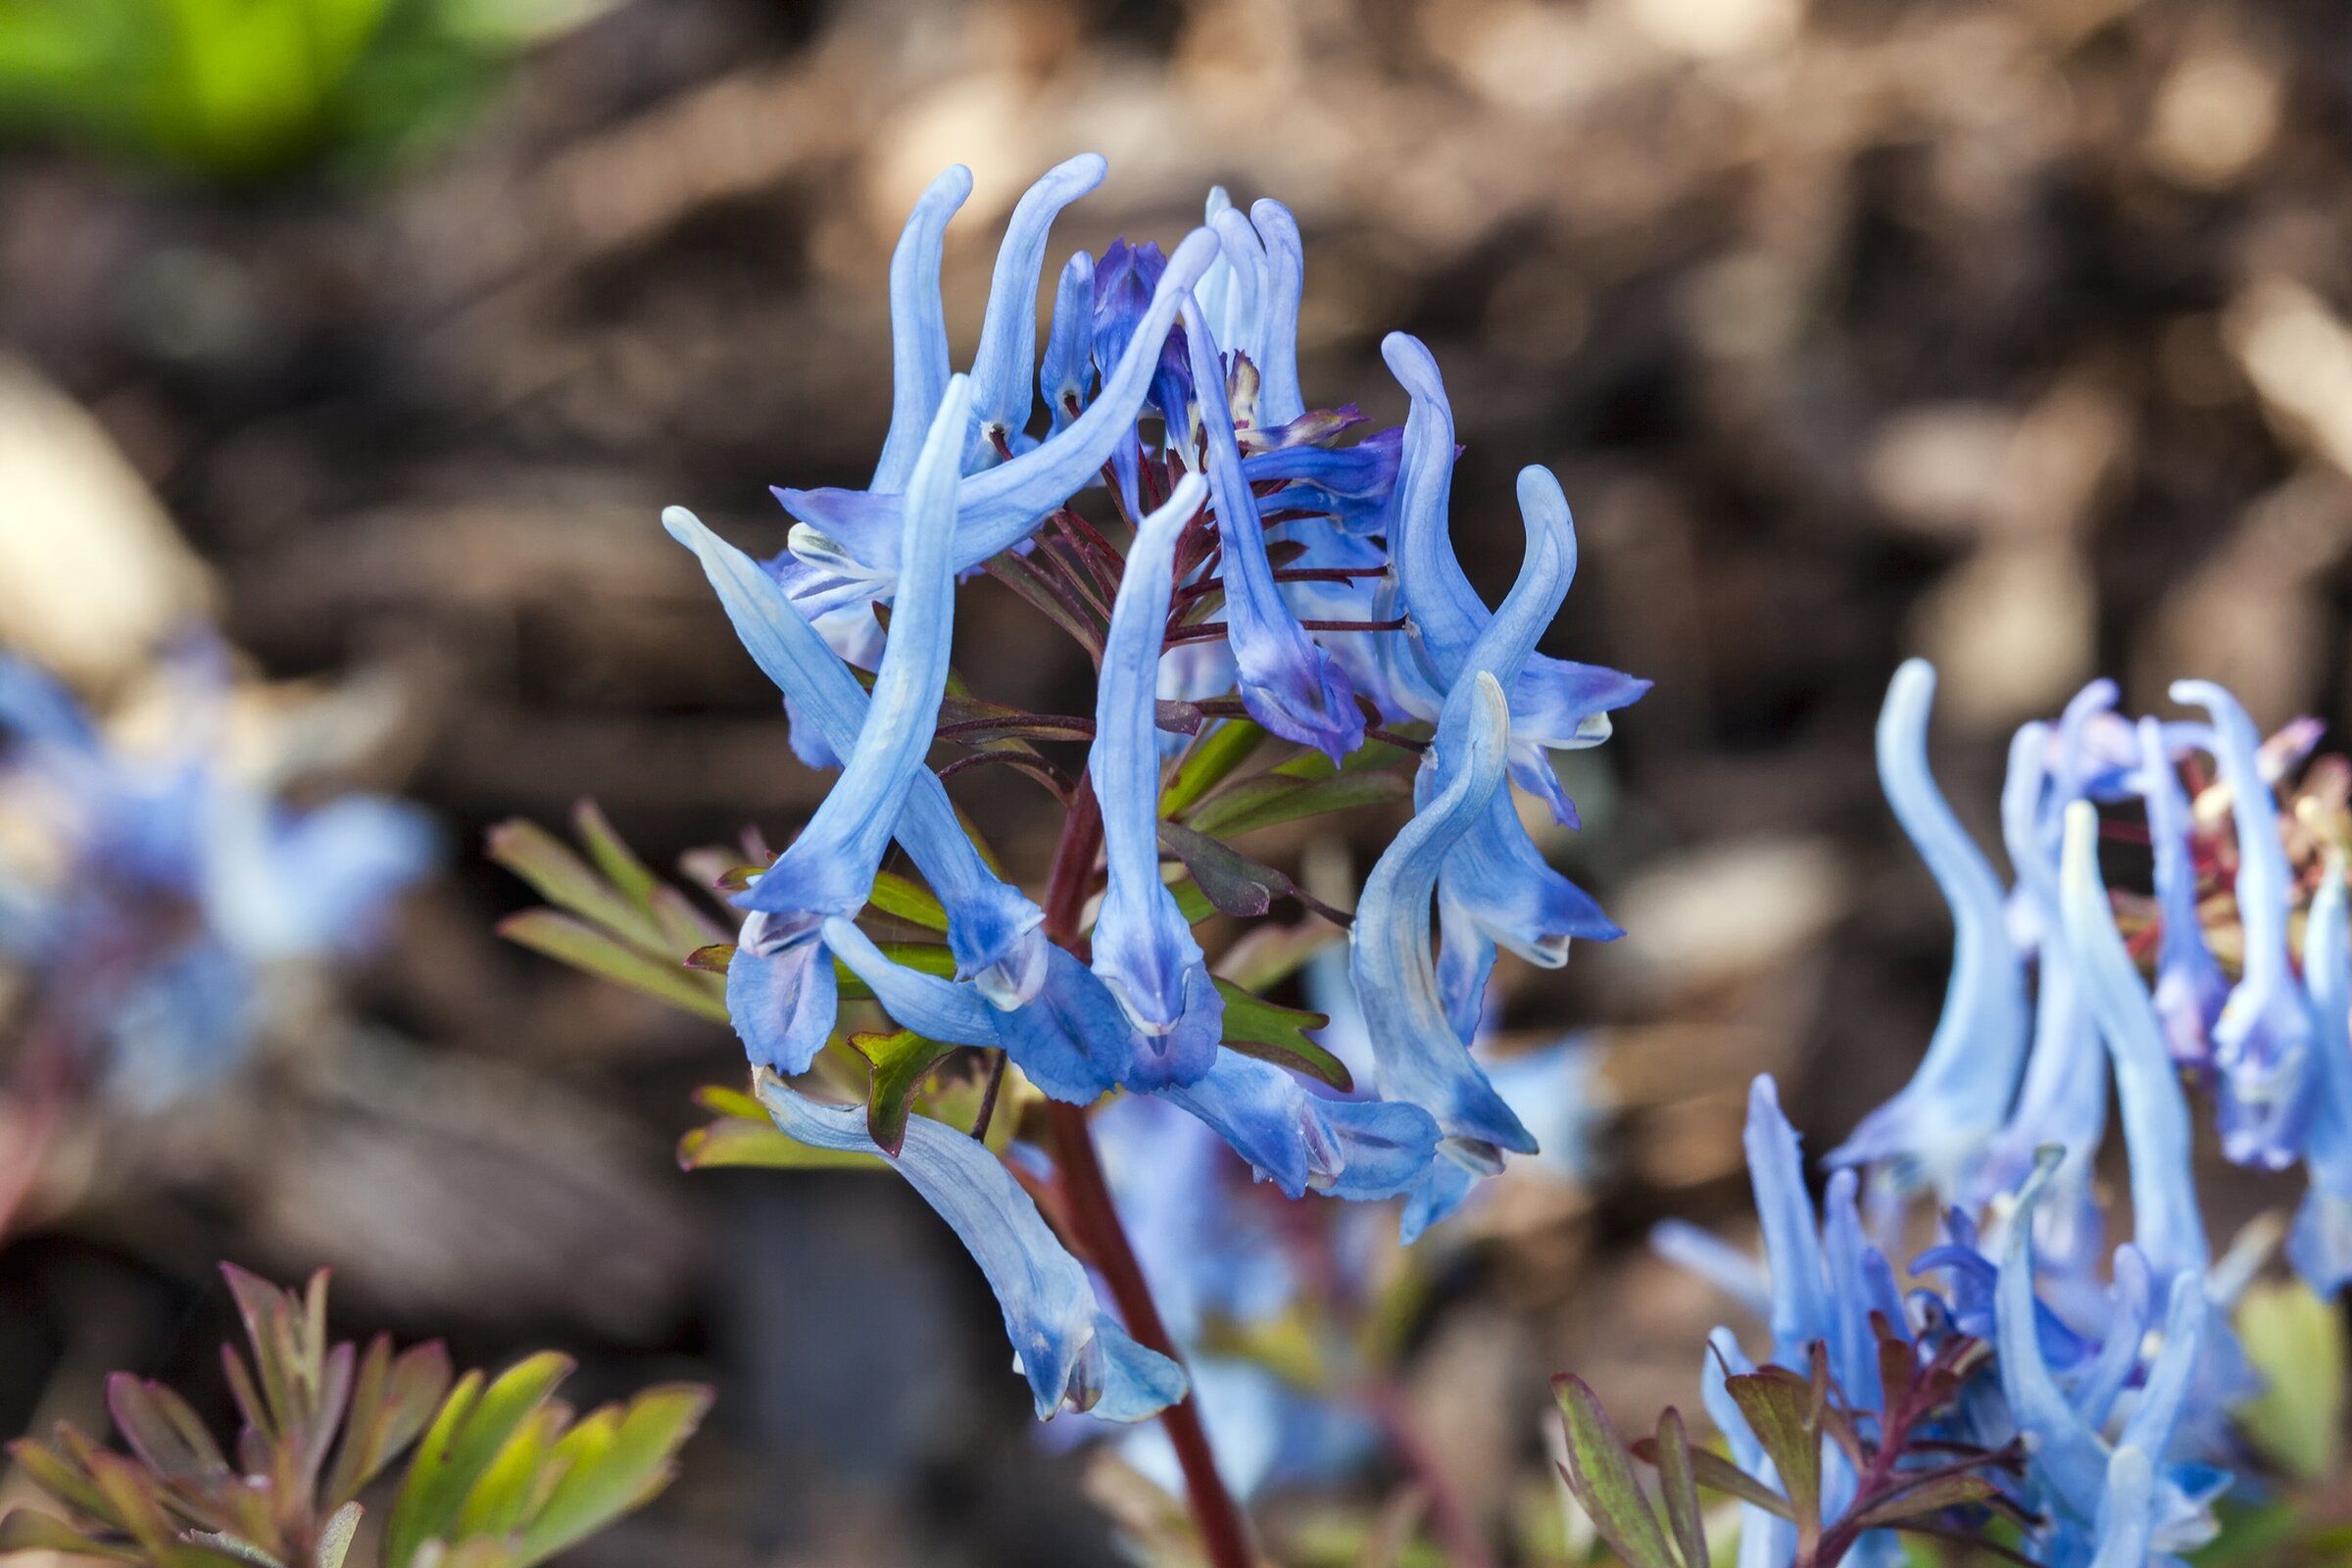 Try these 'special' spring ephemeral plants for fleeting garden